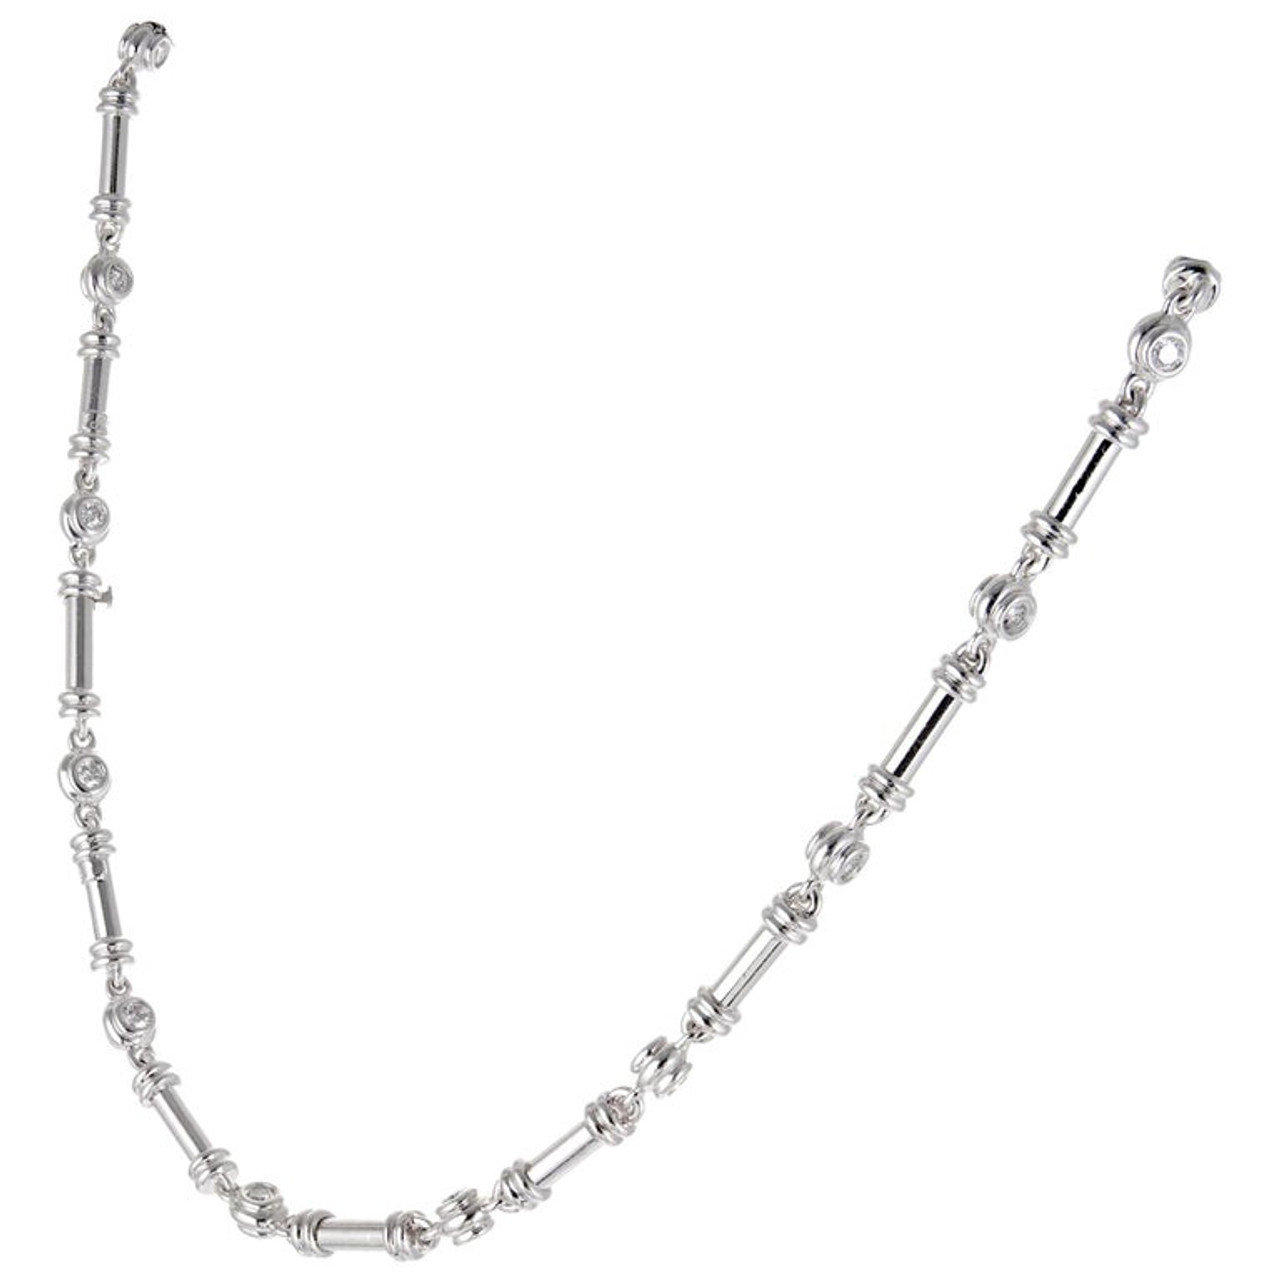 Diamond Necklace 18" MSRP $167 Details about   White Ice Sterling Silver Satin and Polished 